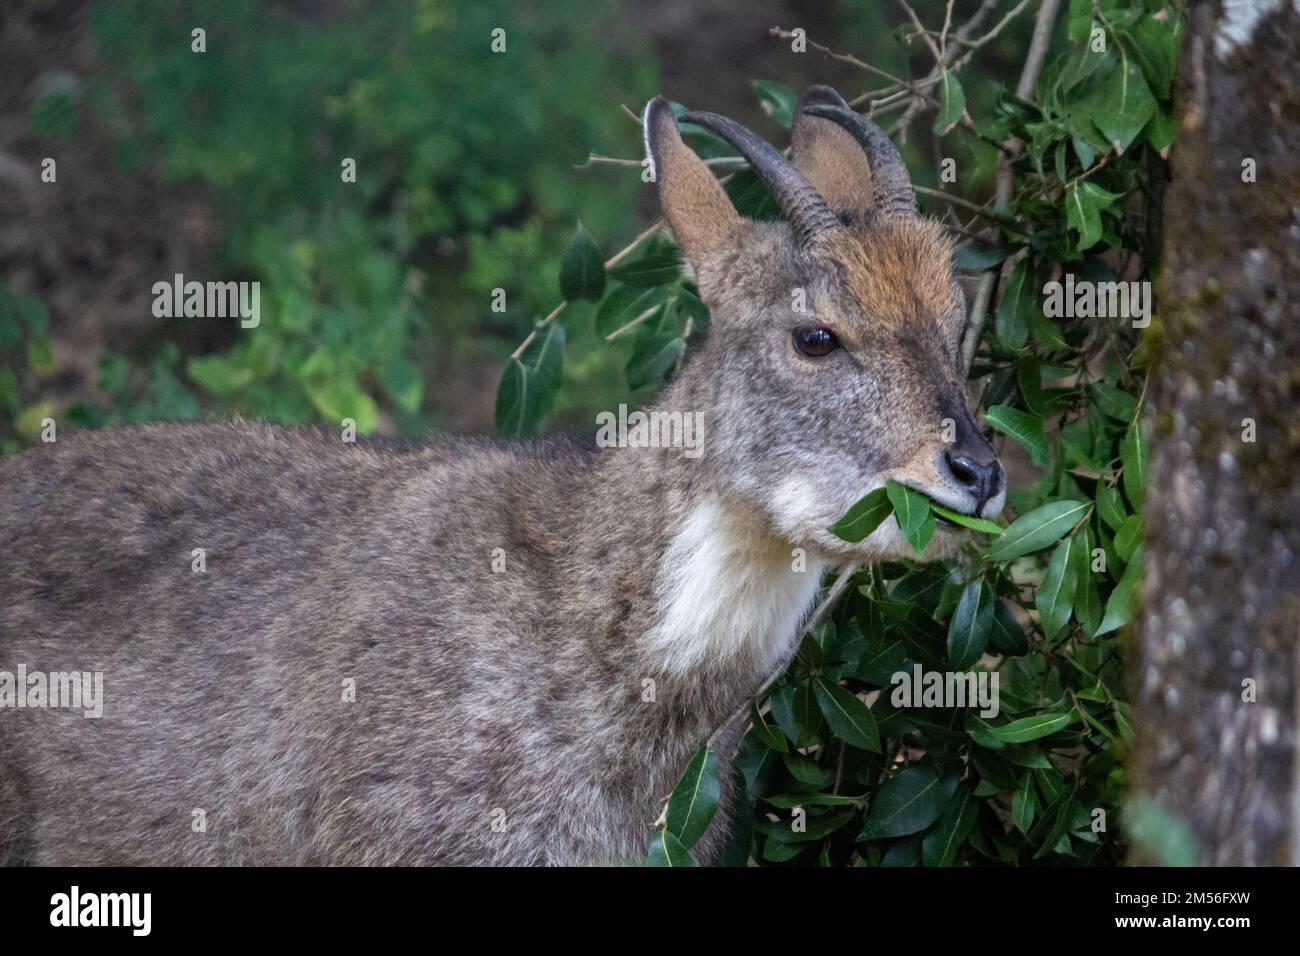 A closeup of a long-tailed goral (Naemorhedus caudatus) with leaves in its mouth in a forest Stock Photo